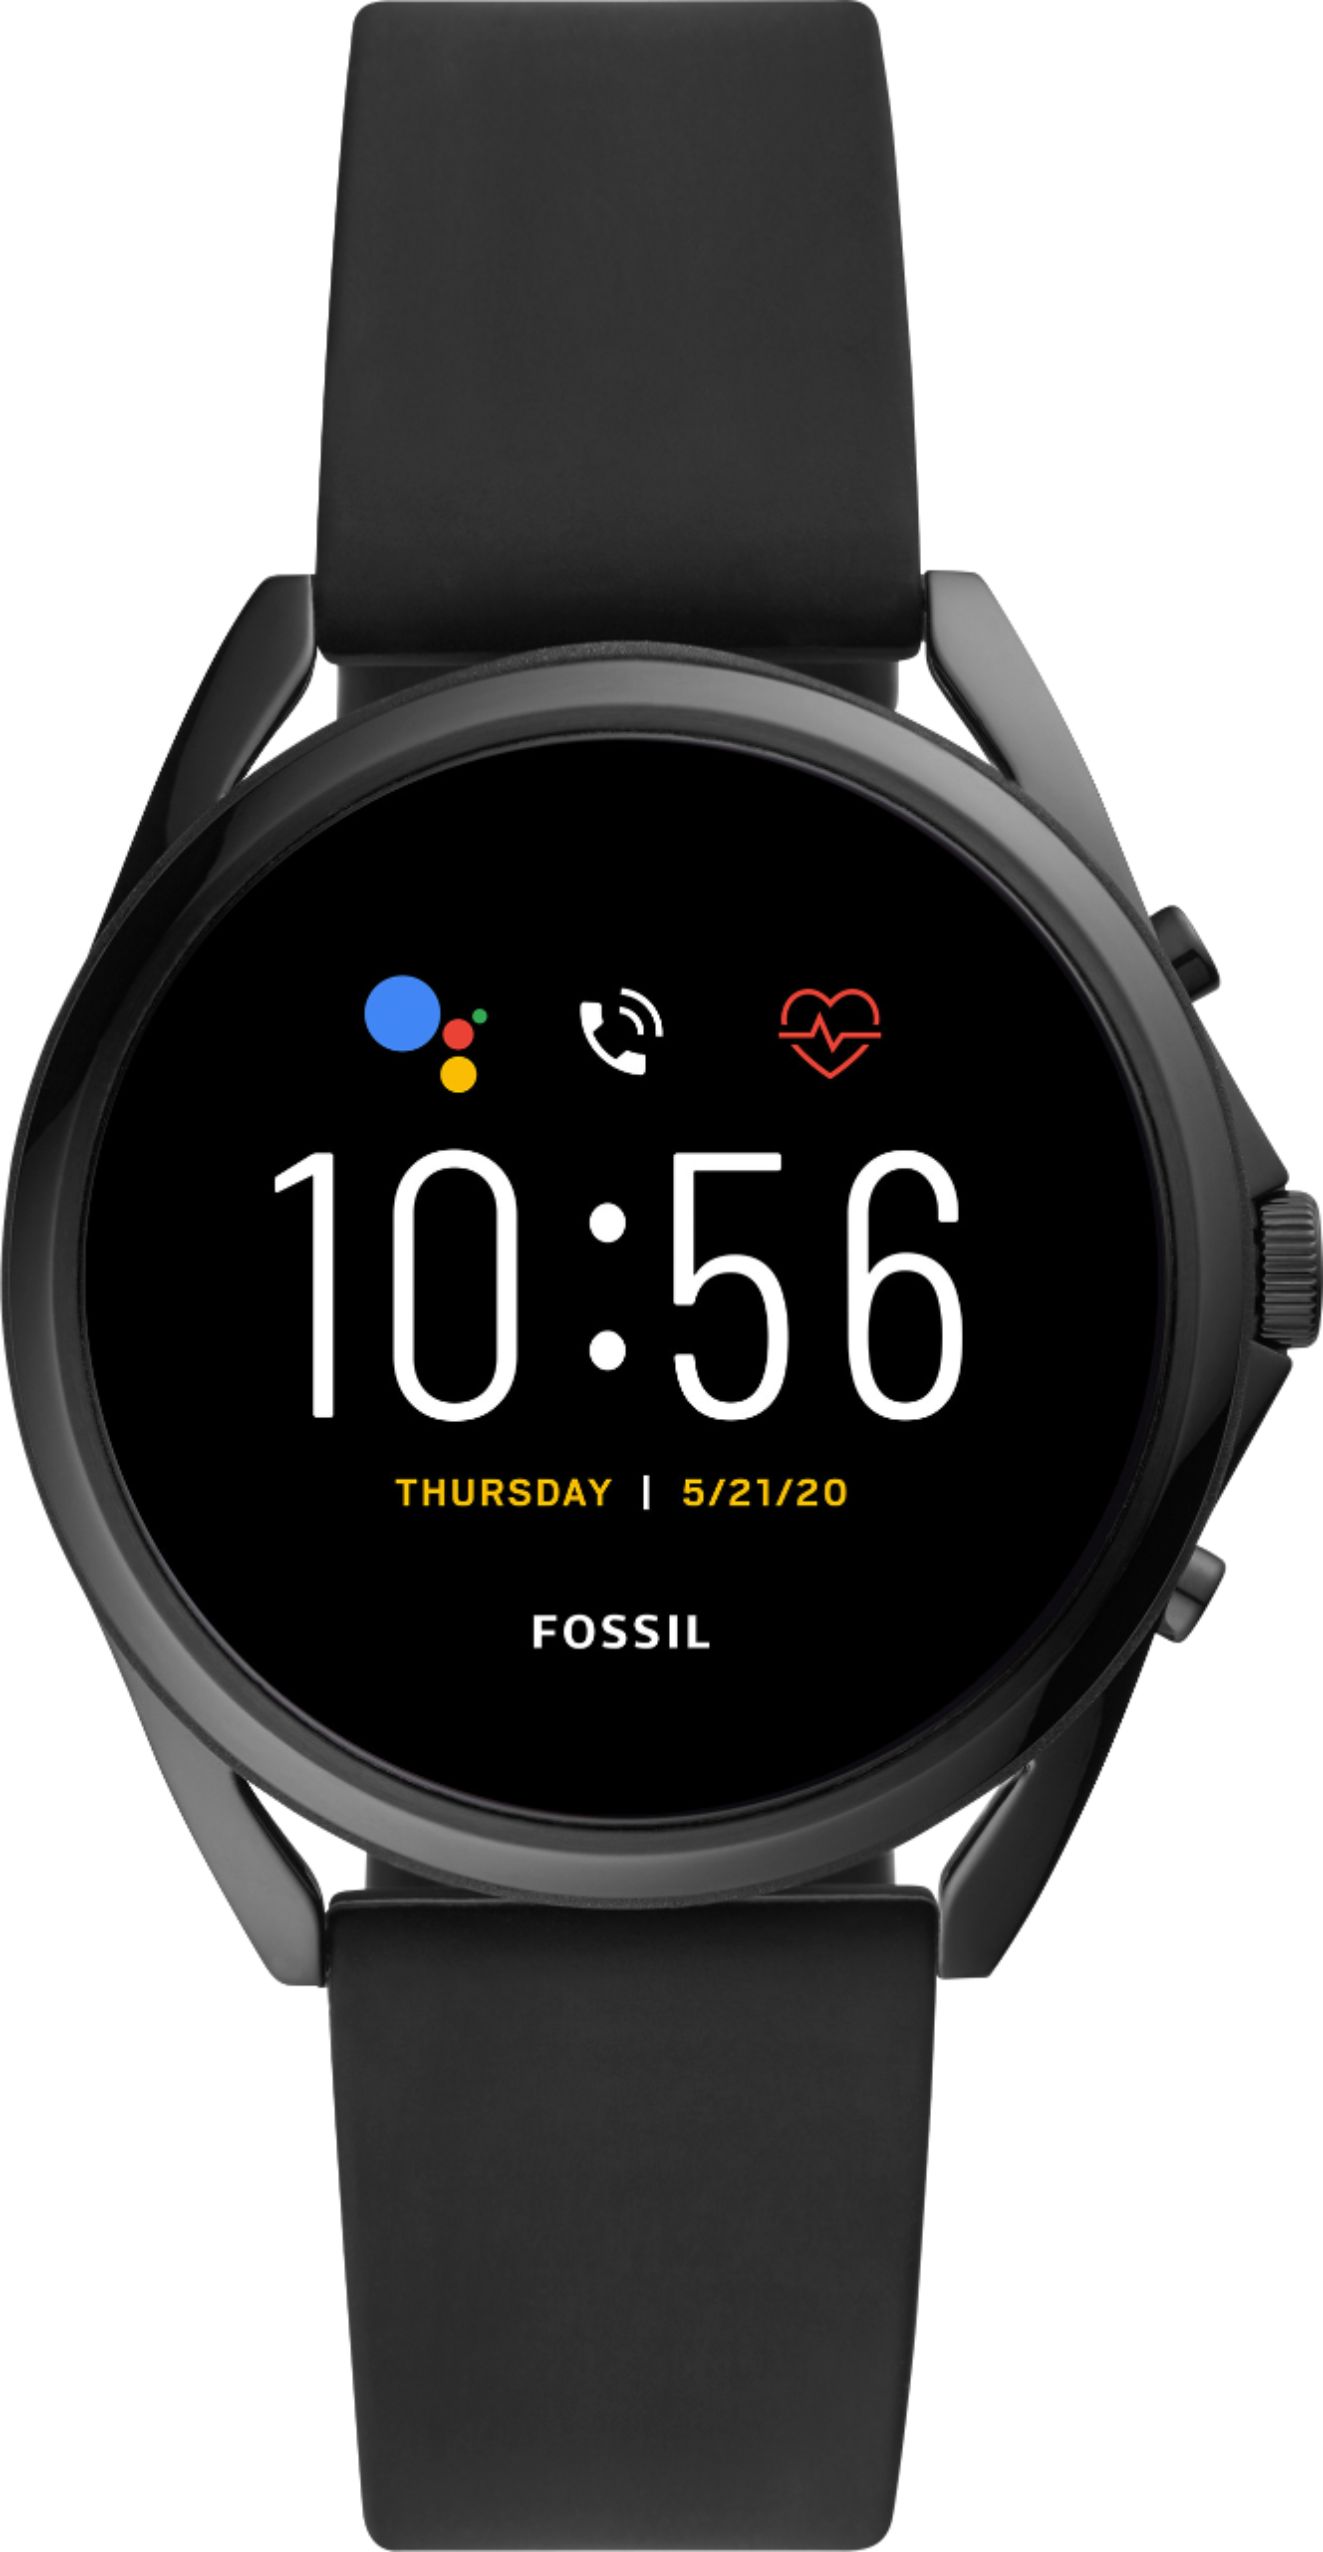 Fossil Releases Gen 5 Smartwatches, Keeps Wear OS on Life Support